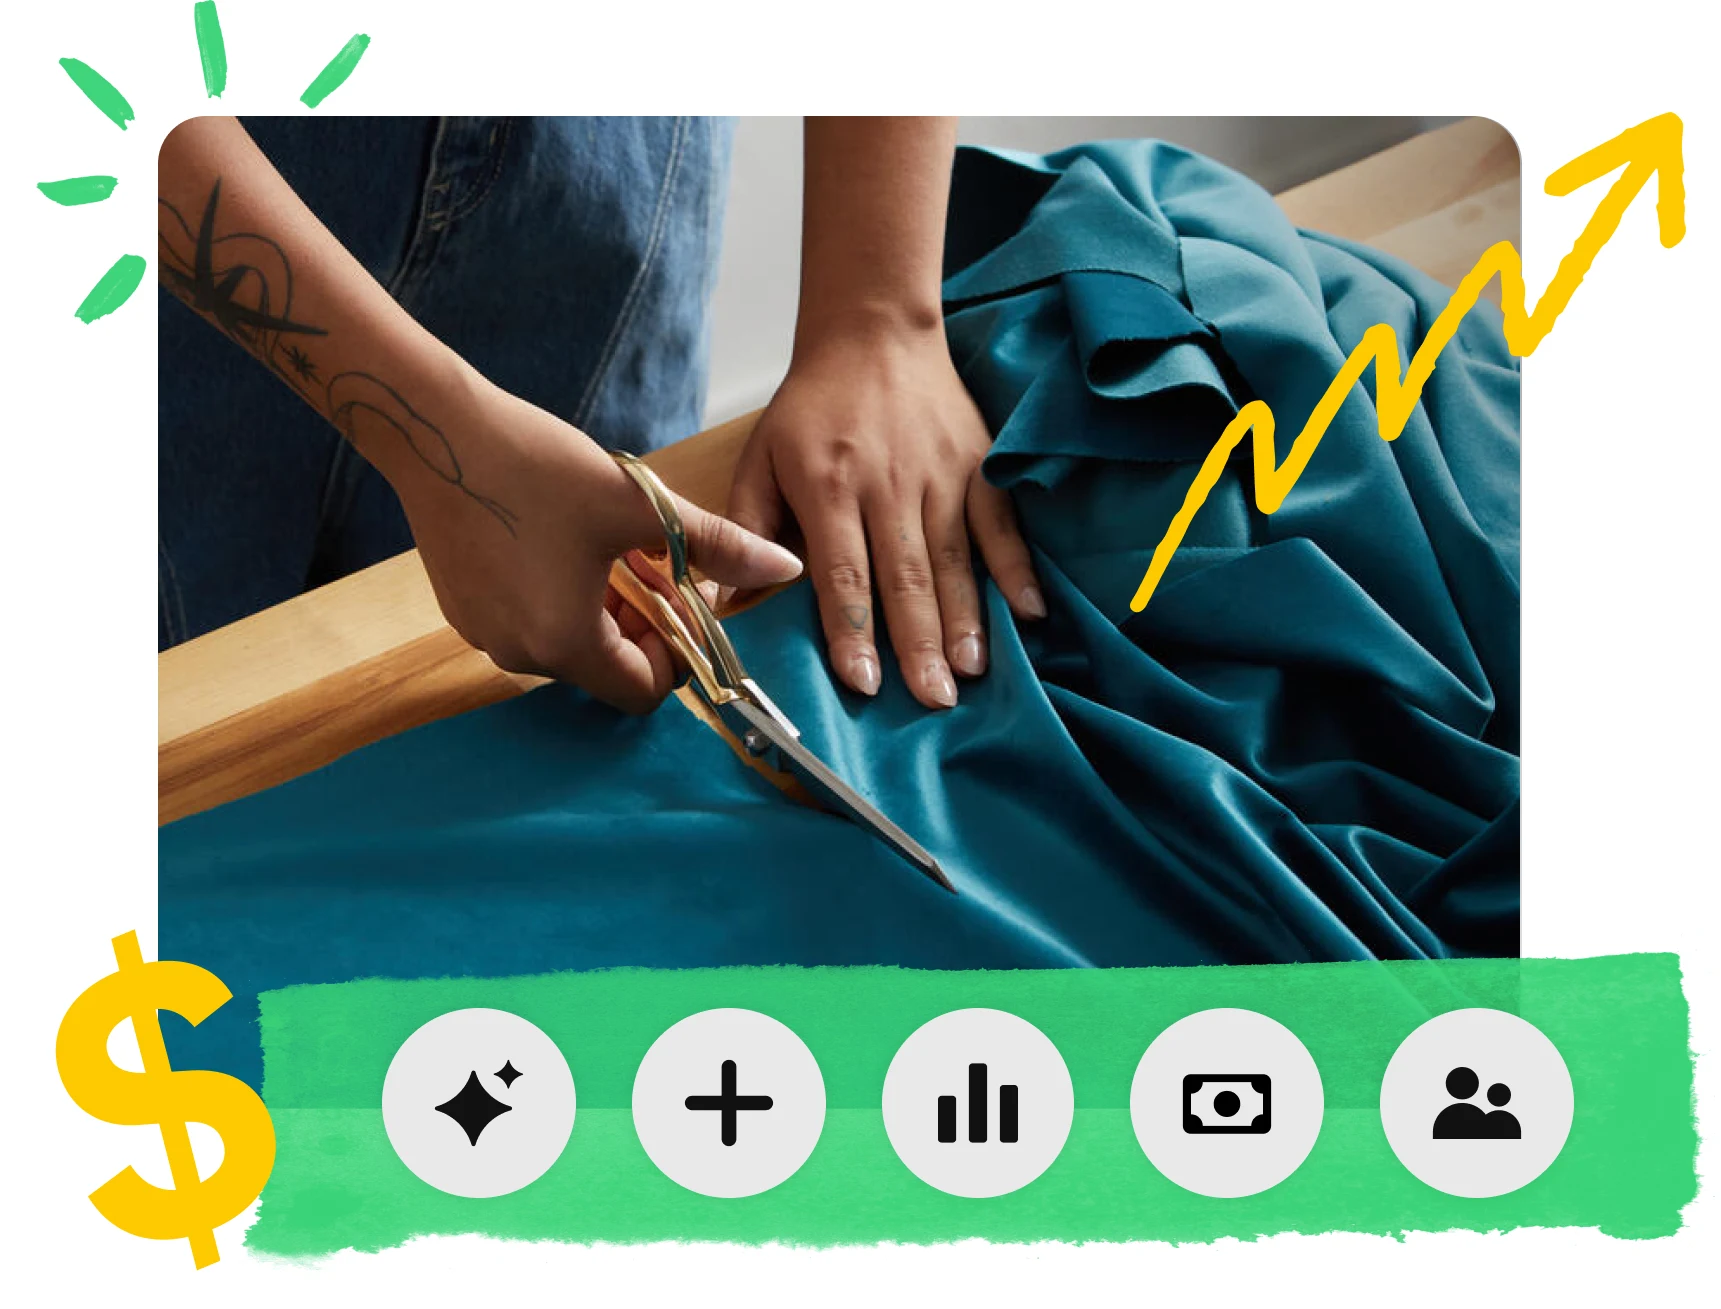 Close-up of a person cutting a bolt of teal fabric, yellow dollar sign and zigzag arrow pointing upward to right 